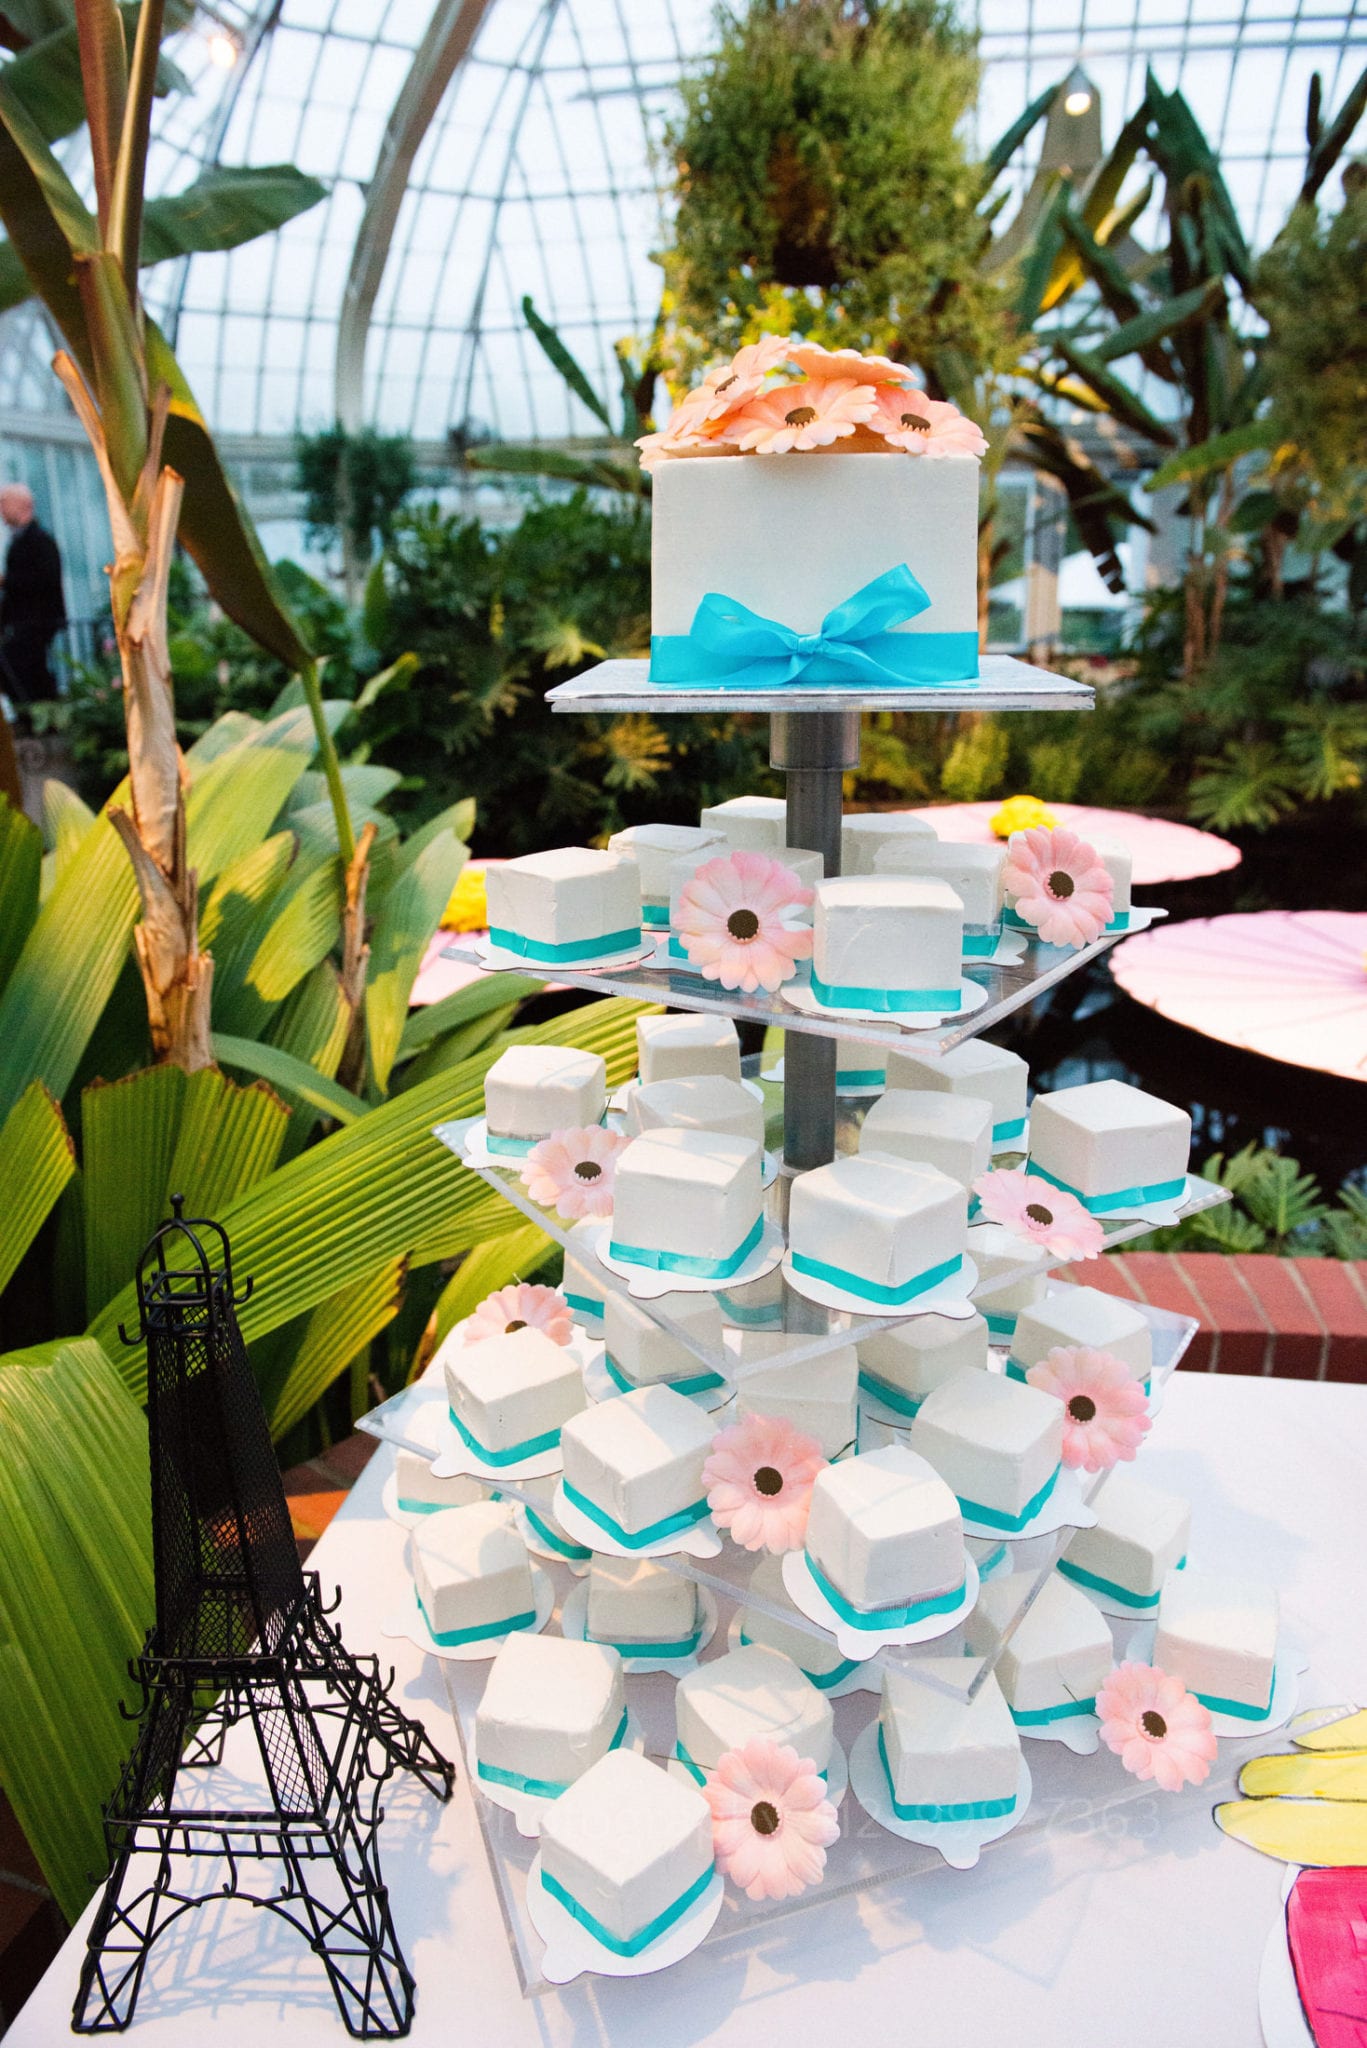 white and blue pastries sit on a cake stand with pink flowers Phipps Conservatory Weddings